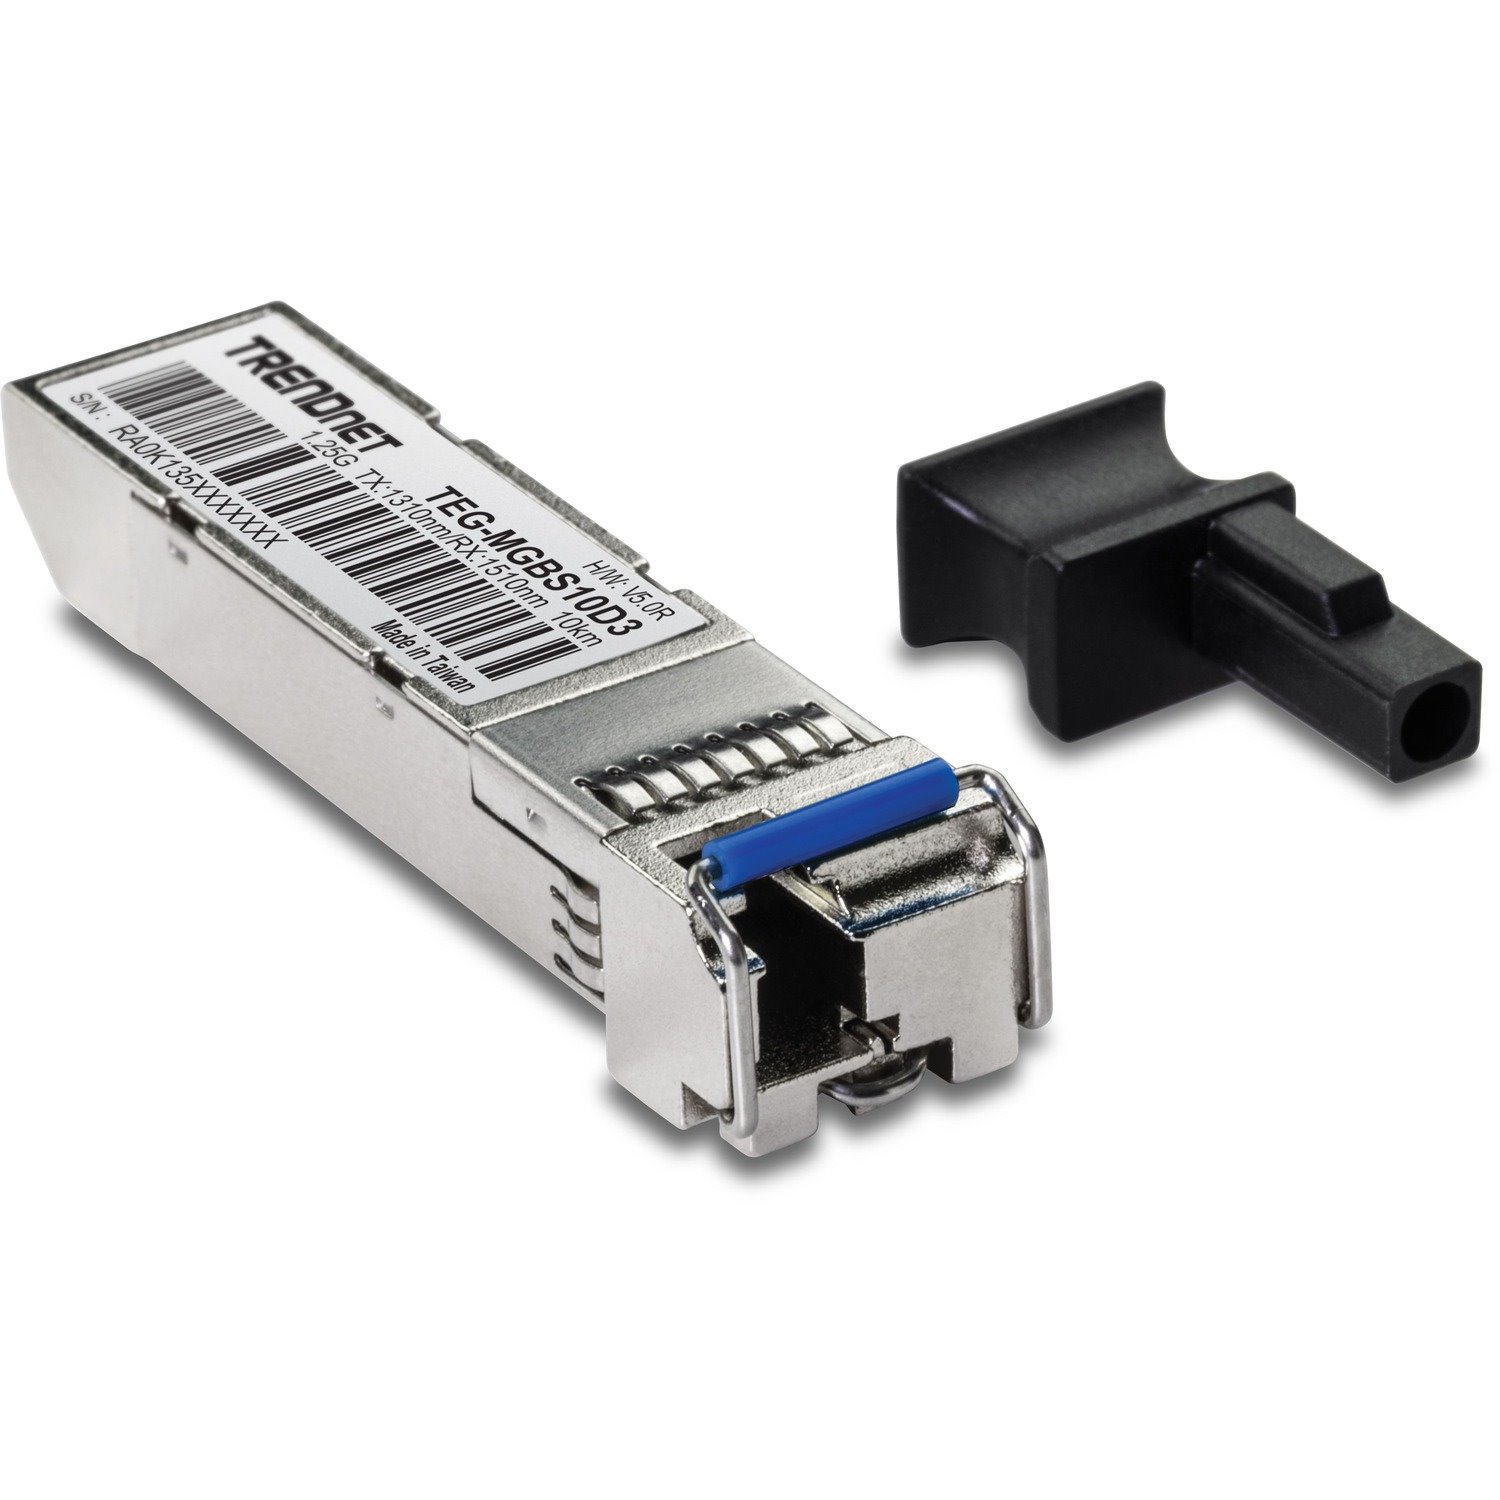 TRENDnet SFP to RJ45 Dual Wavelength Single-Mode LC Module; TEG-MGBS10D3; Must Pair with TEG-MGBS10D5 or a Compatible Module; Up to 10 km (6.2 Miles); Compatible with Standard SFP; Lifetime Protection